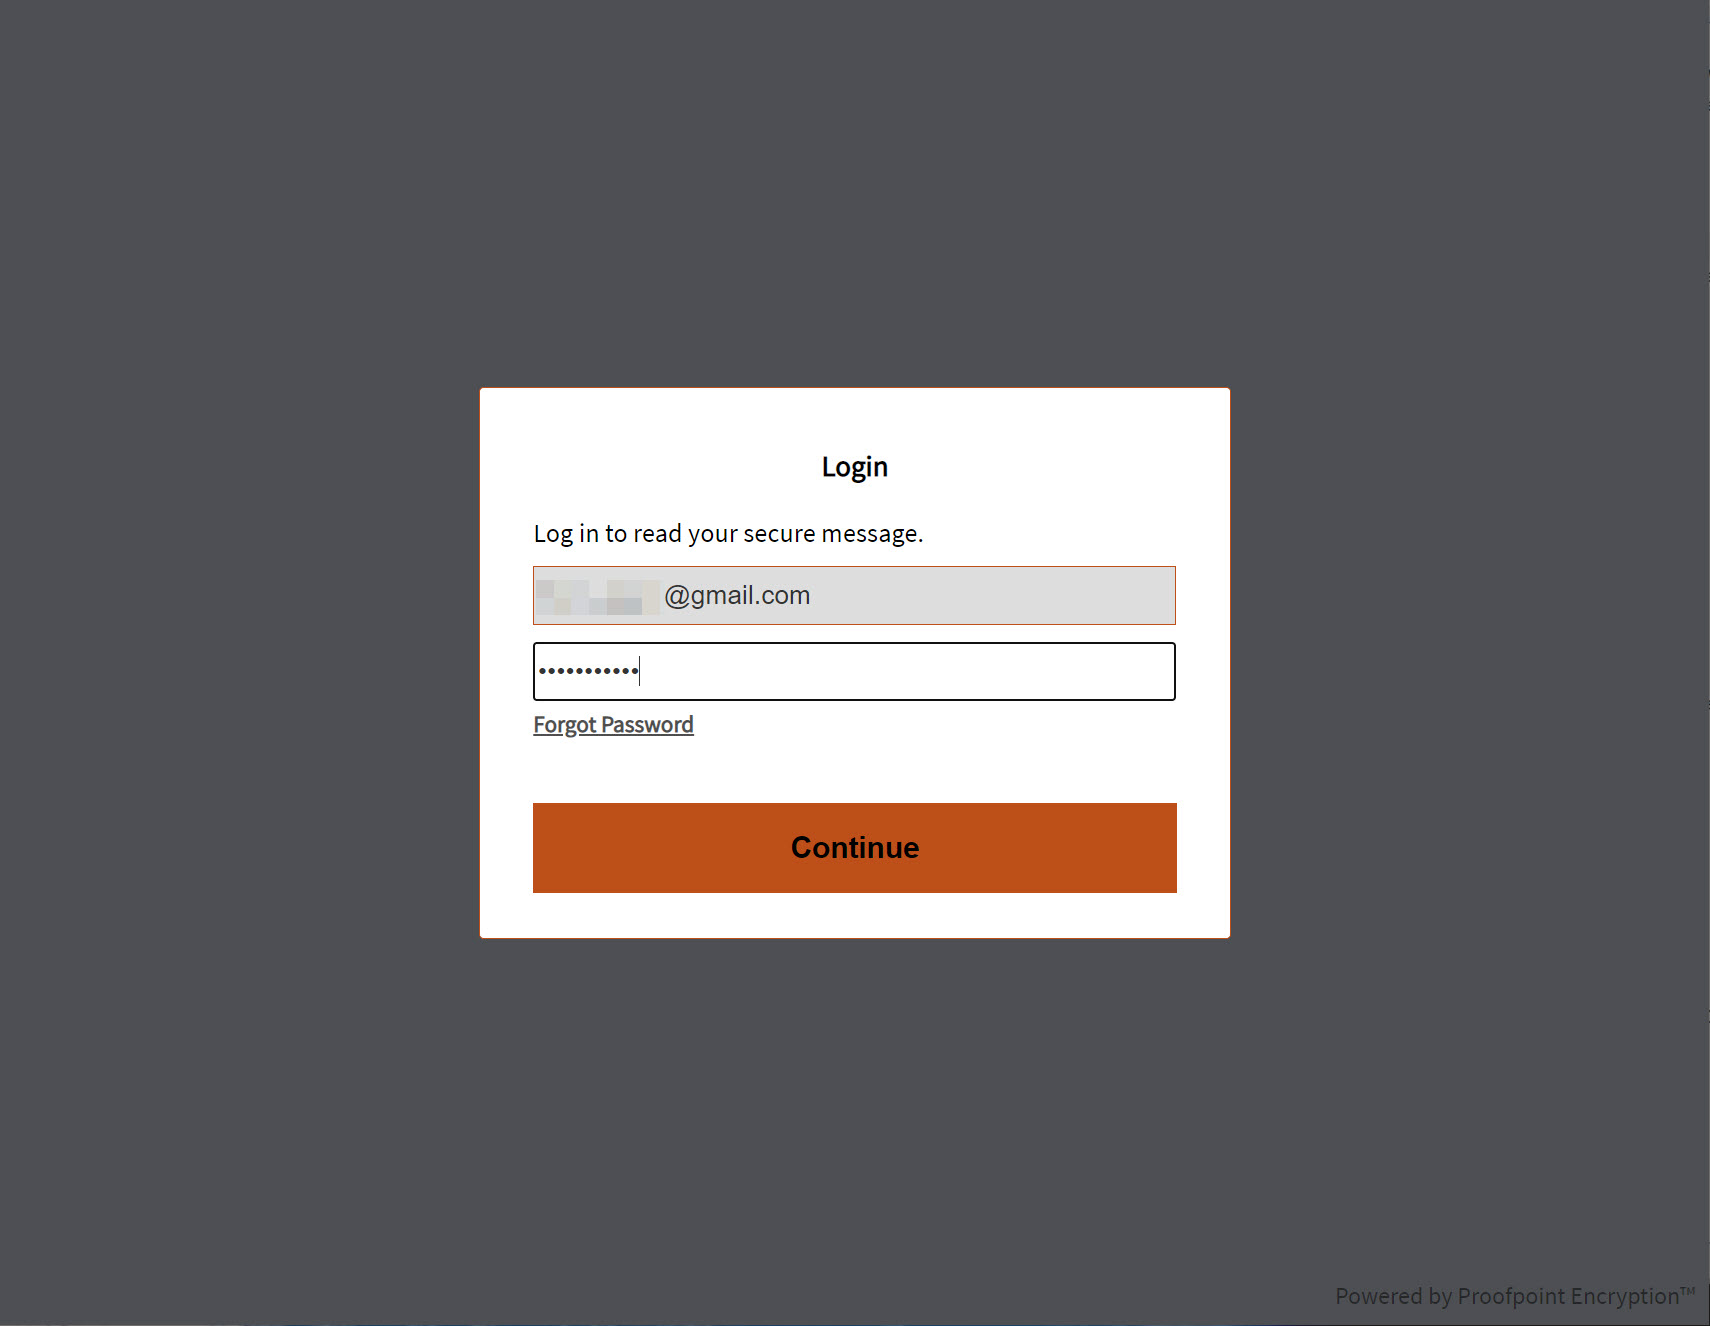 An image showing the login box where the user can enter their previously set password to open an encrypted message from UTHealth. If you have never used a non-UTHealth email address to read UTHealth encrypted messages, you will first be prompted to set a password for your non-UTHealth email account.